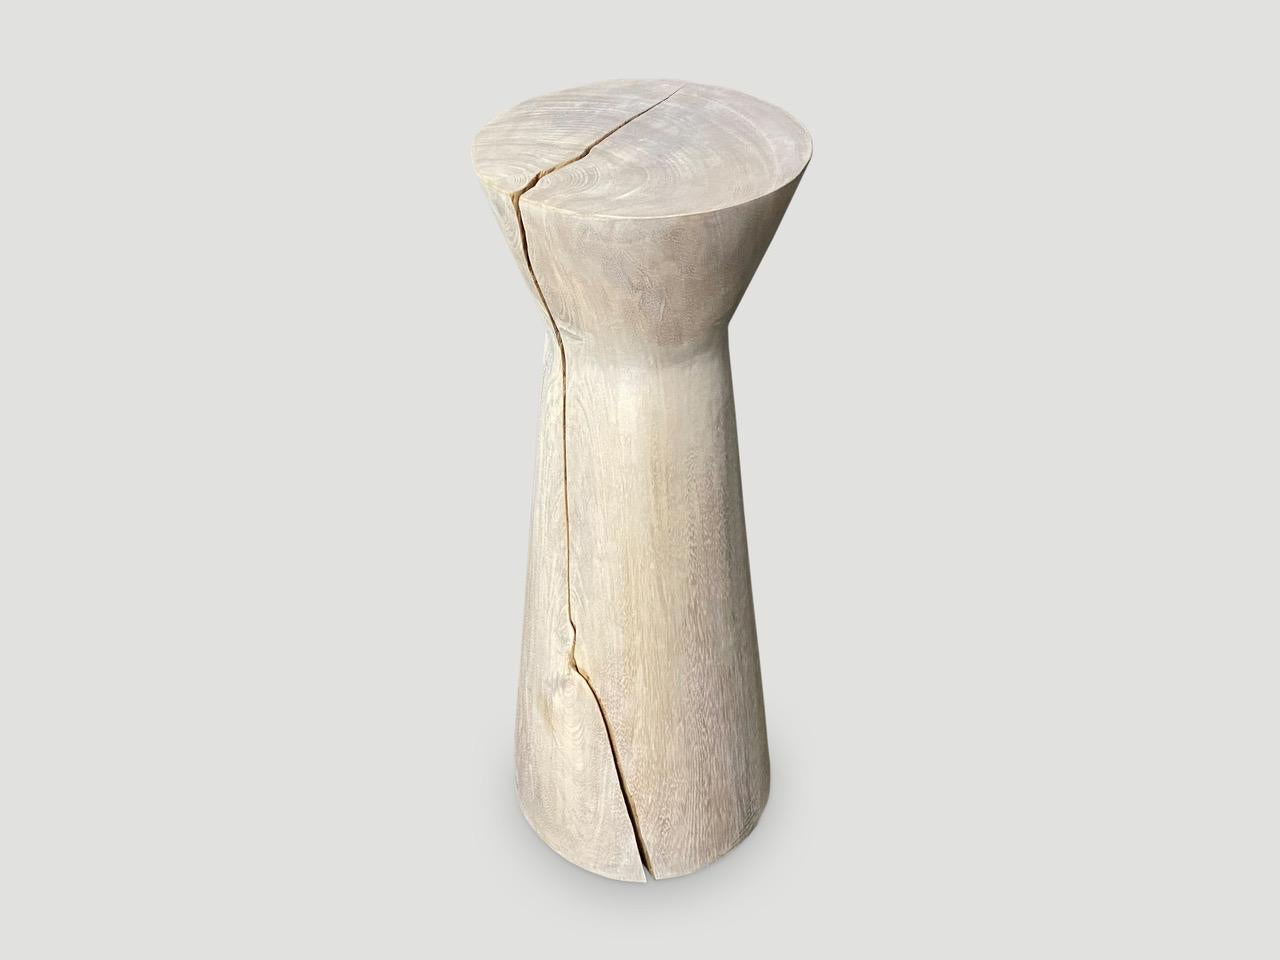 Beautiful hourglass tall side table made from solid suar wood. The bottom is 11” diameter and the top 9.5” diameter.

The St. Barts Collection features an exciting new line of organic white wash, bleached and natural weathered wood furniture. The